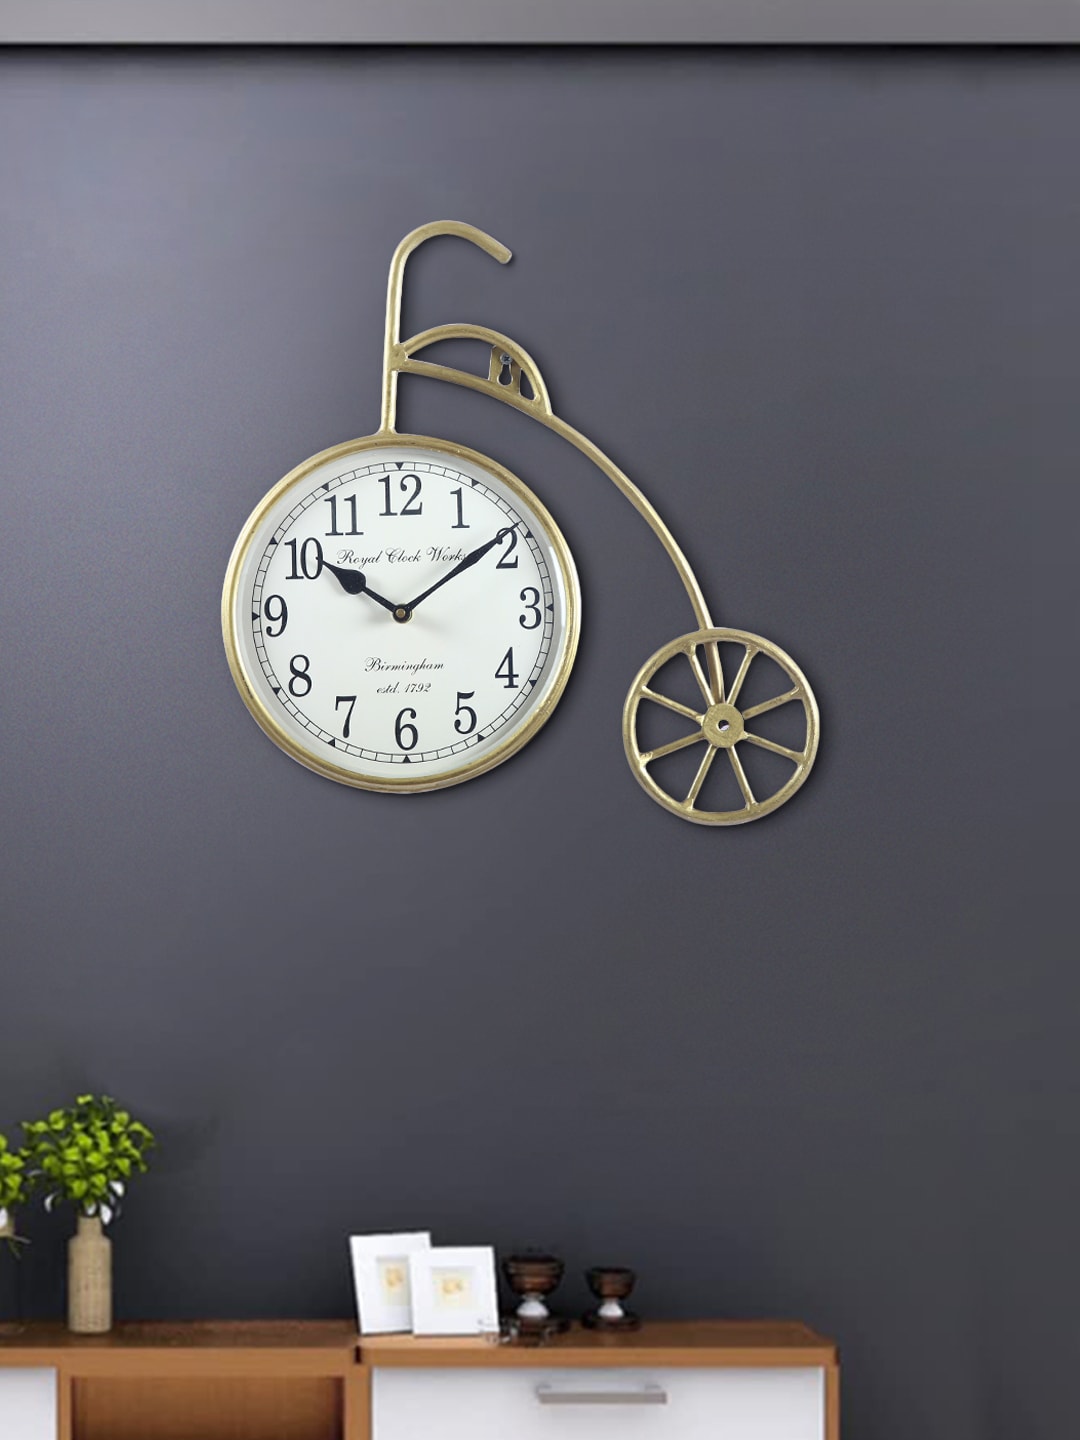 Aapno Rajasthan Gold-Toned & White Bicycle Wall Clock Price in India